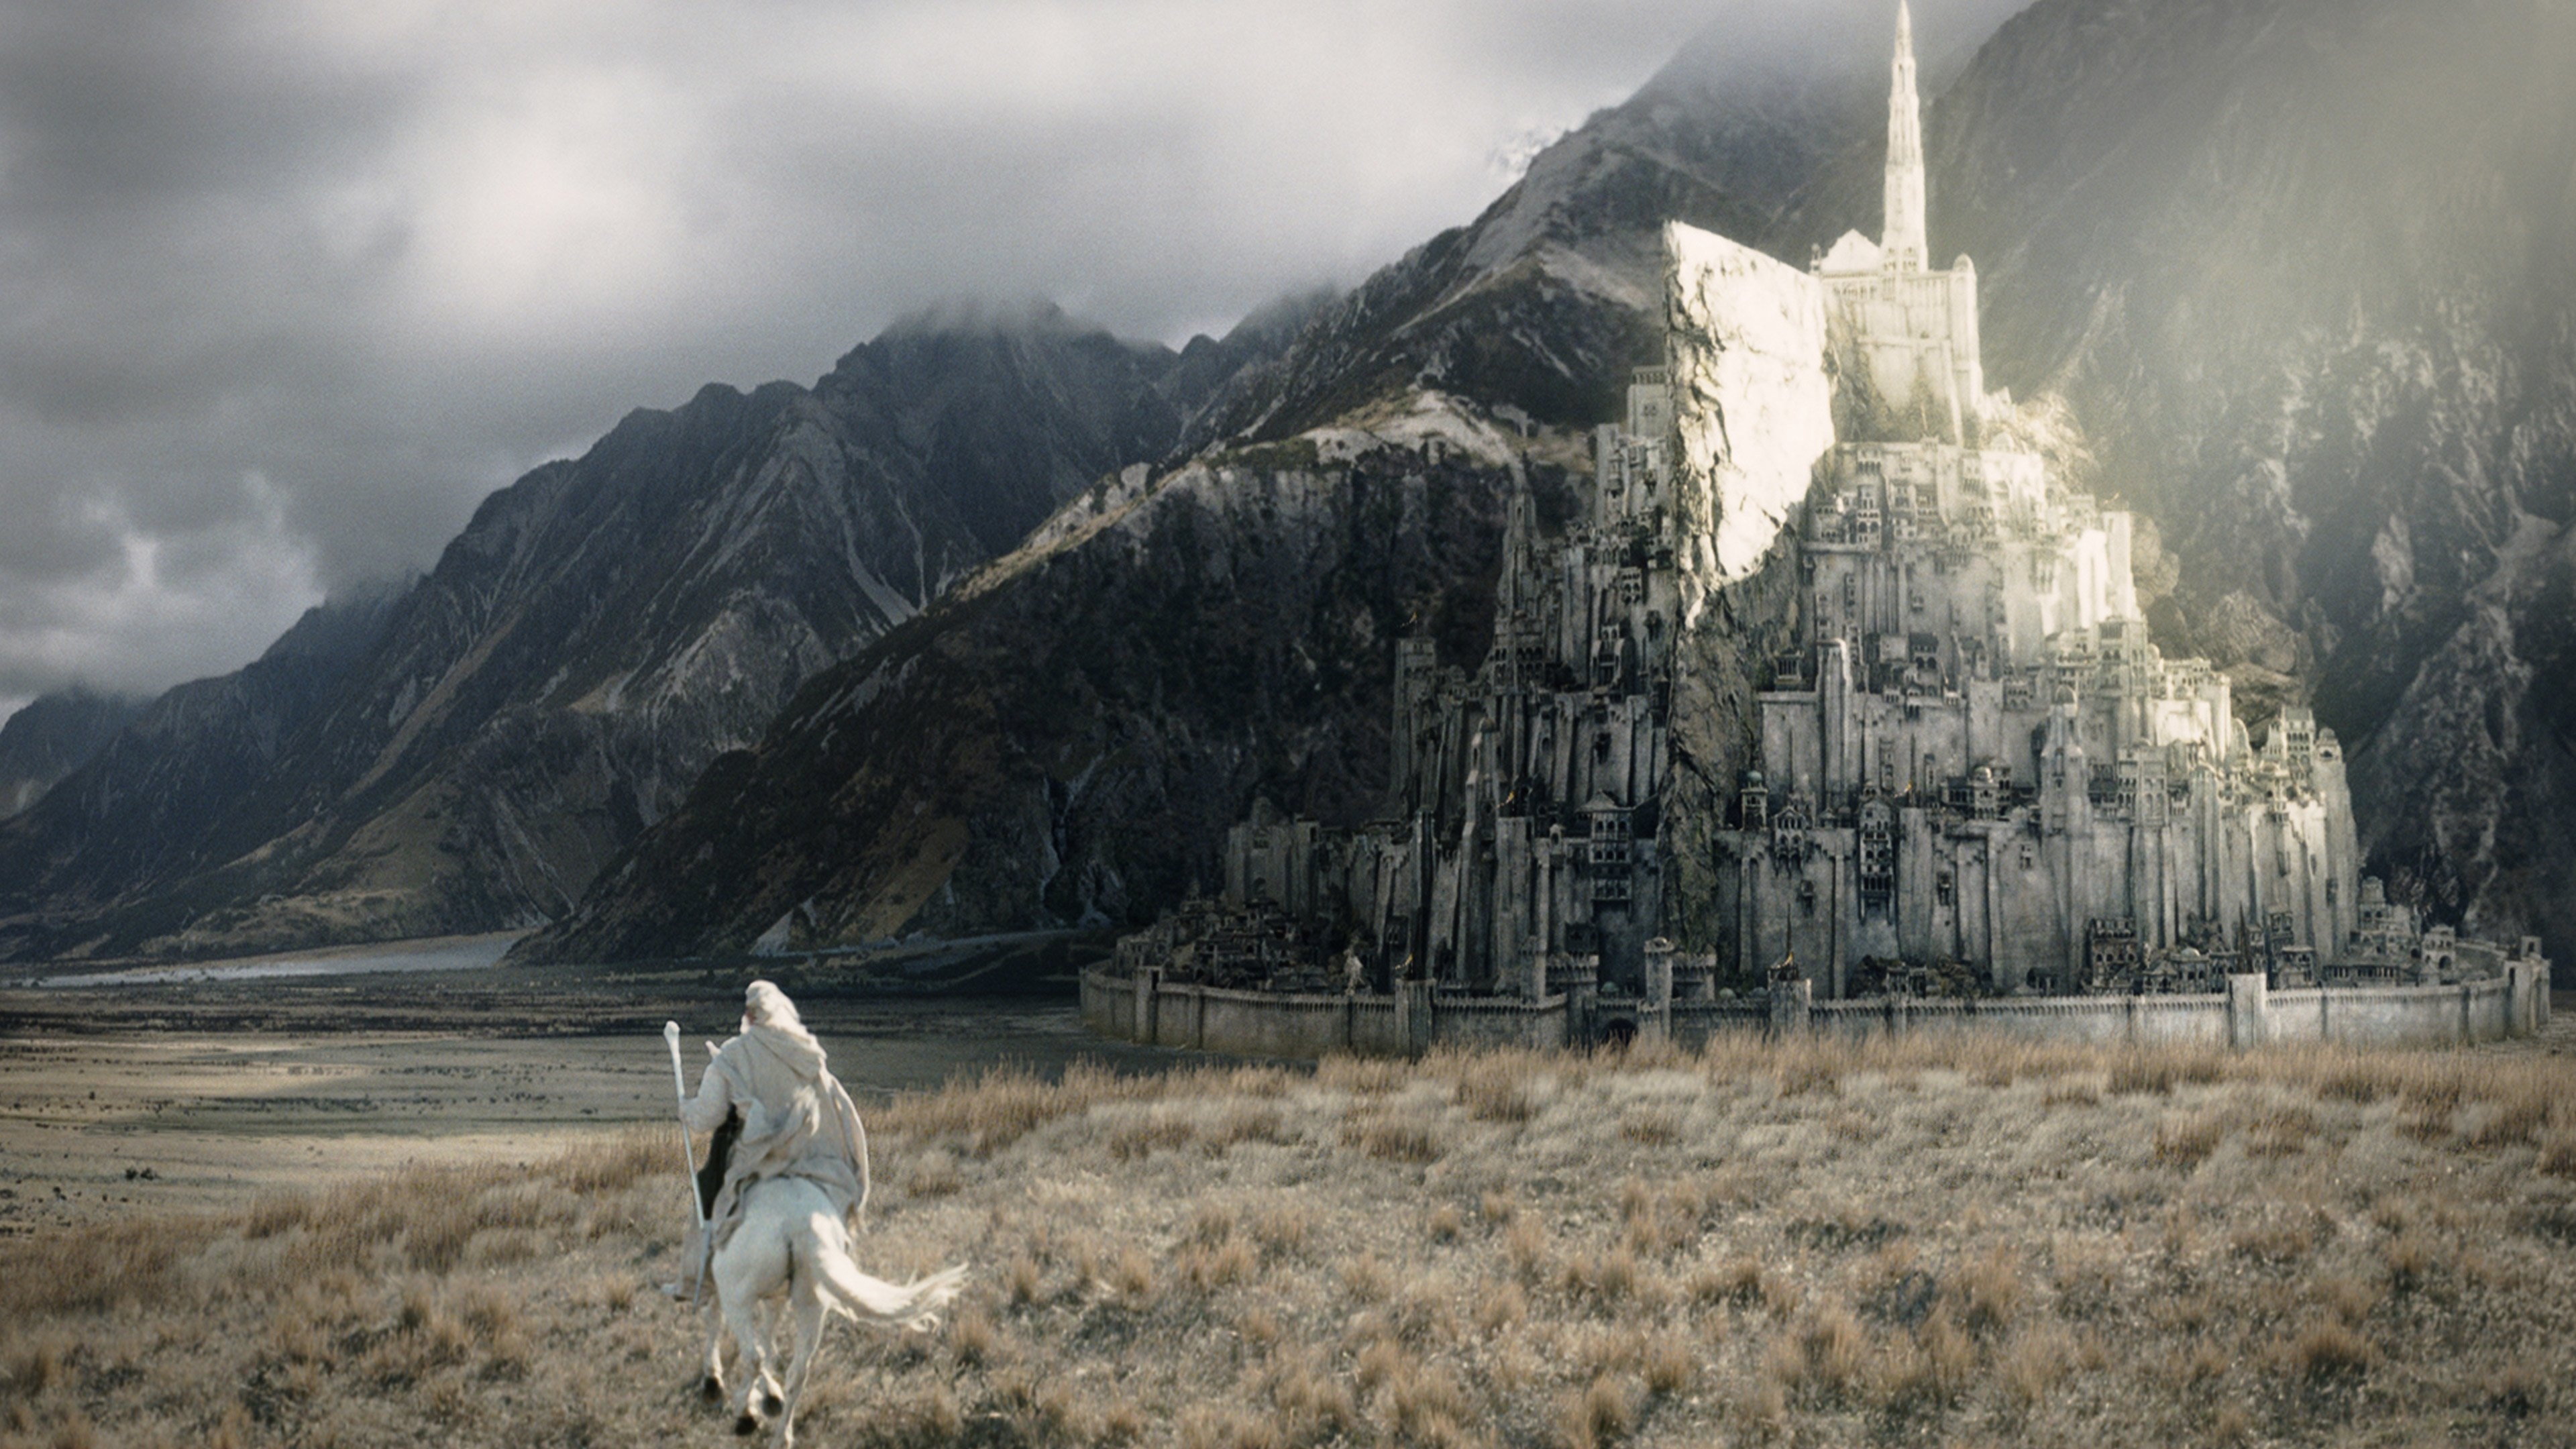 Gondor: A fictional kingdom in J.R.R. Tolkien's writings, The War of the Ring. 3840x2160 4K Wallpaper.